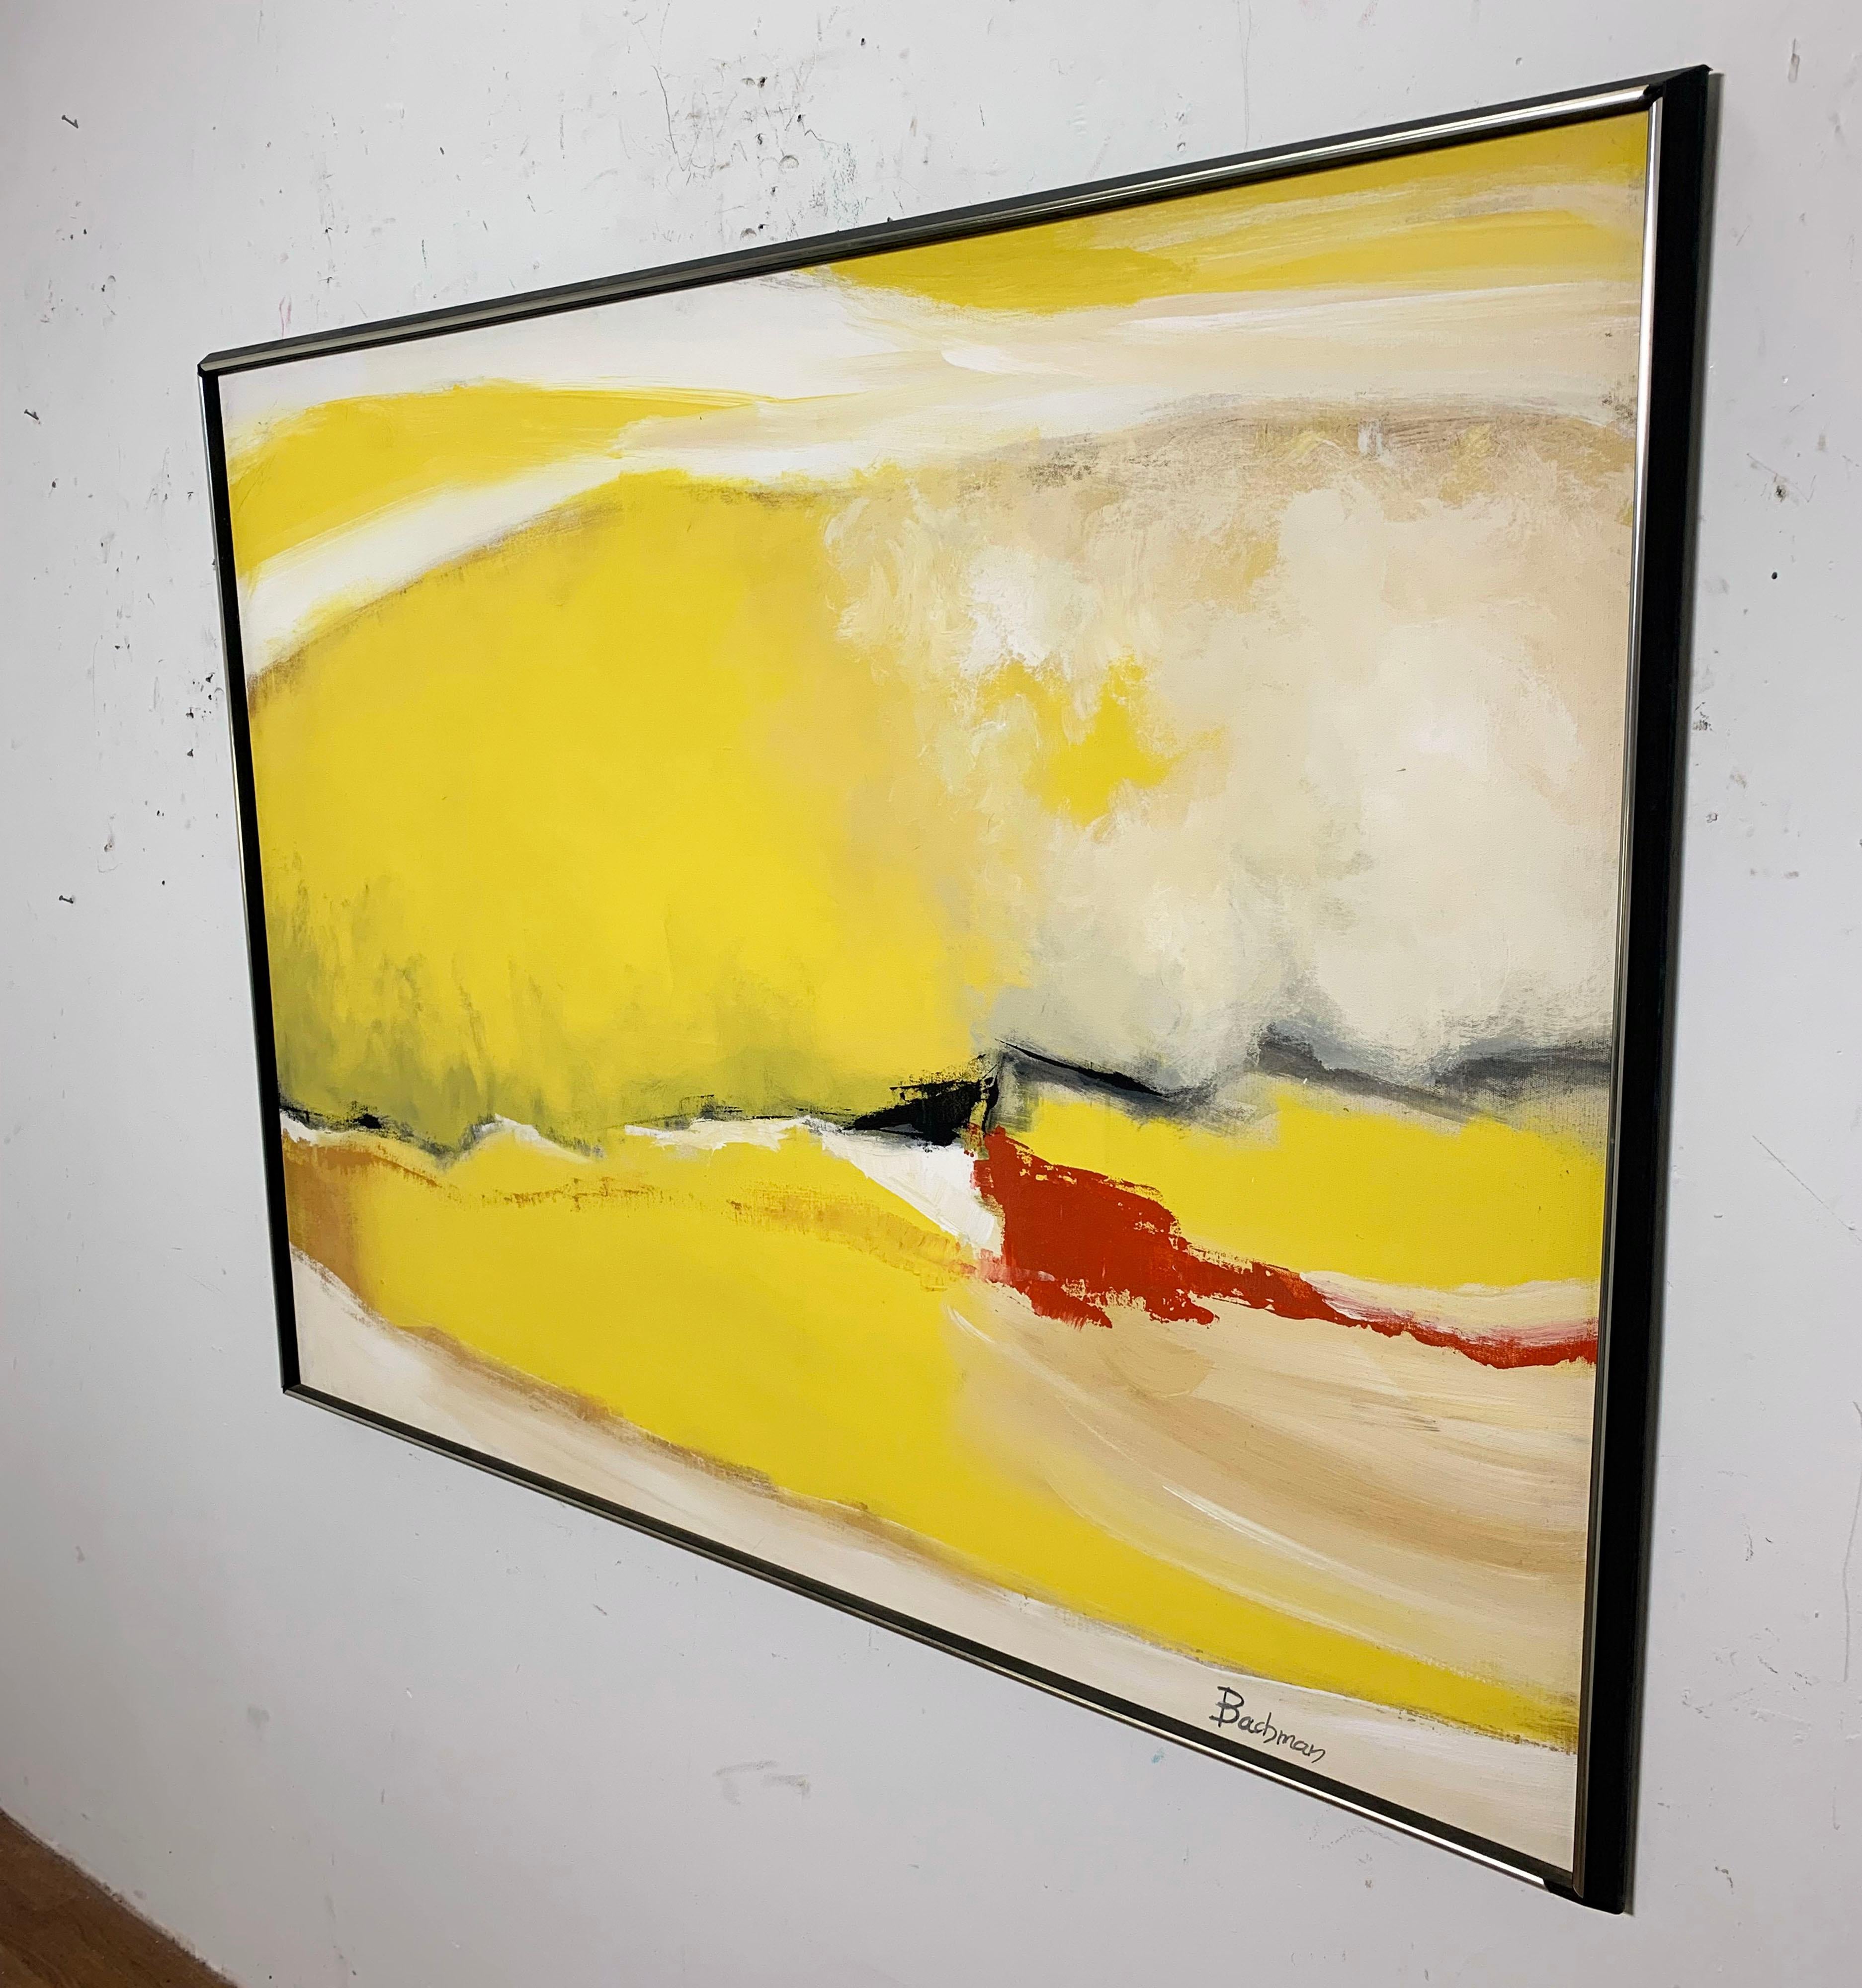 Mid-20th Century Harris Strong Large Scale Abstract Painting Signed Bachman, Circa 1960s